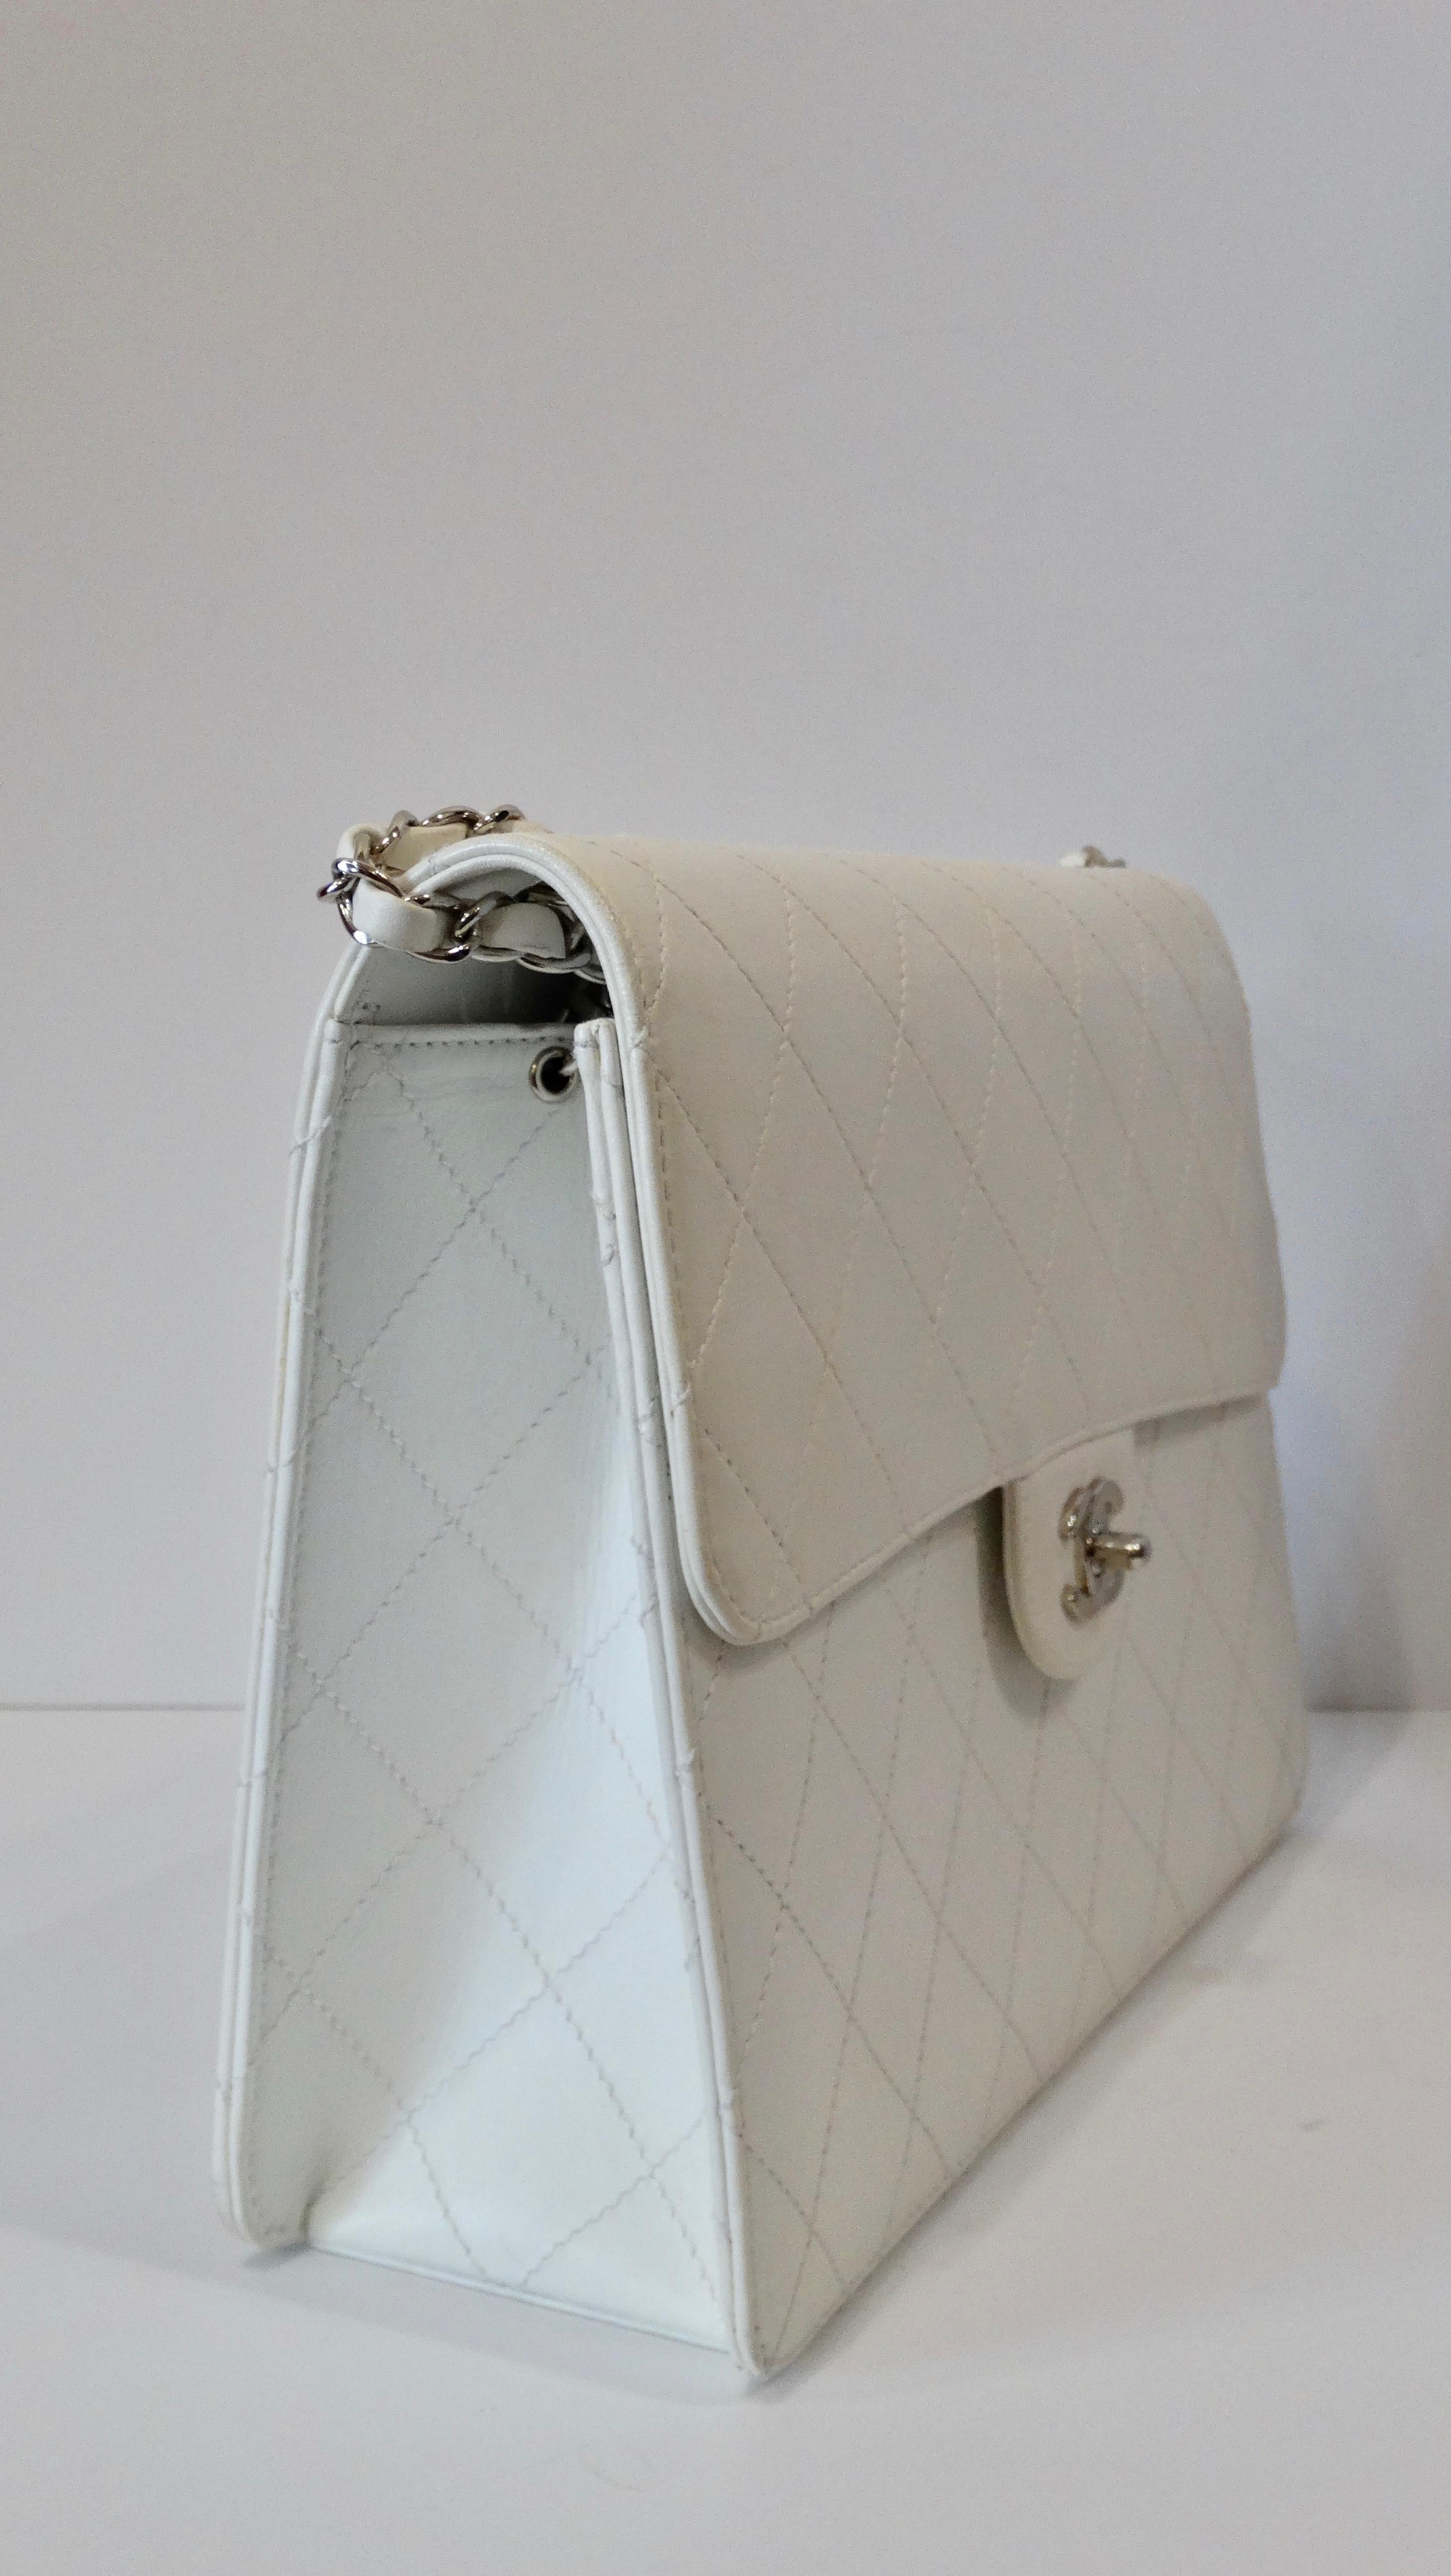 Carry around a rare piece of vintage history courtesy of Karl Lagerfeld! Circa late 1990s, this large Chanel shoulder bag is made of soft opaque white goatskin leather and is stitched with Chanel's signature quilting pattern. Features silver plated